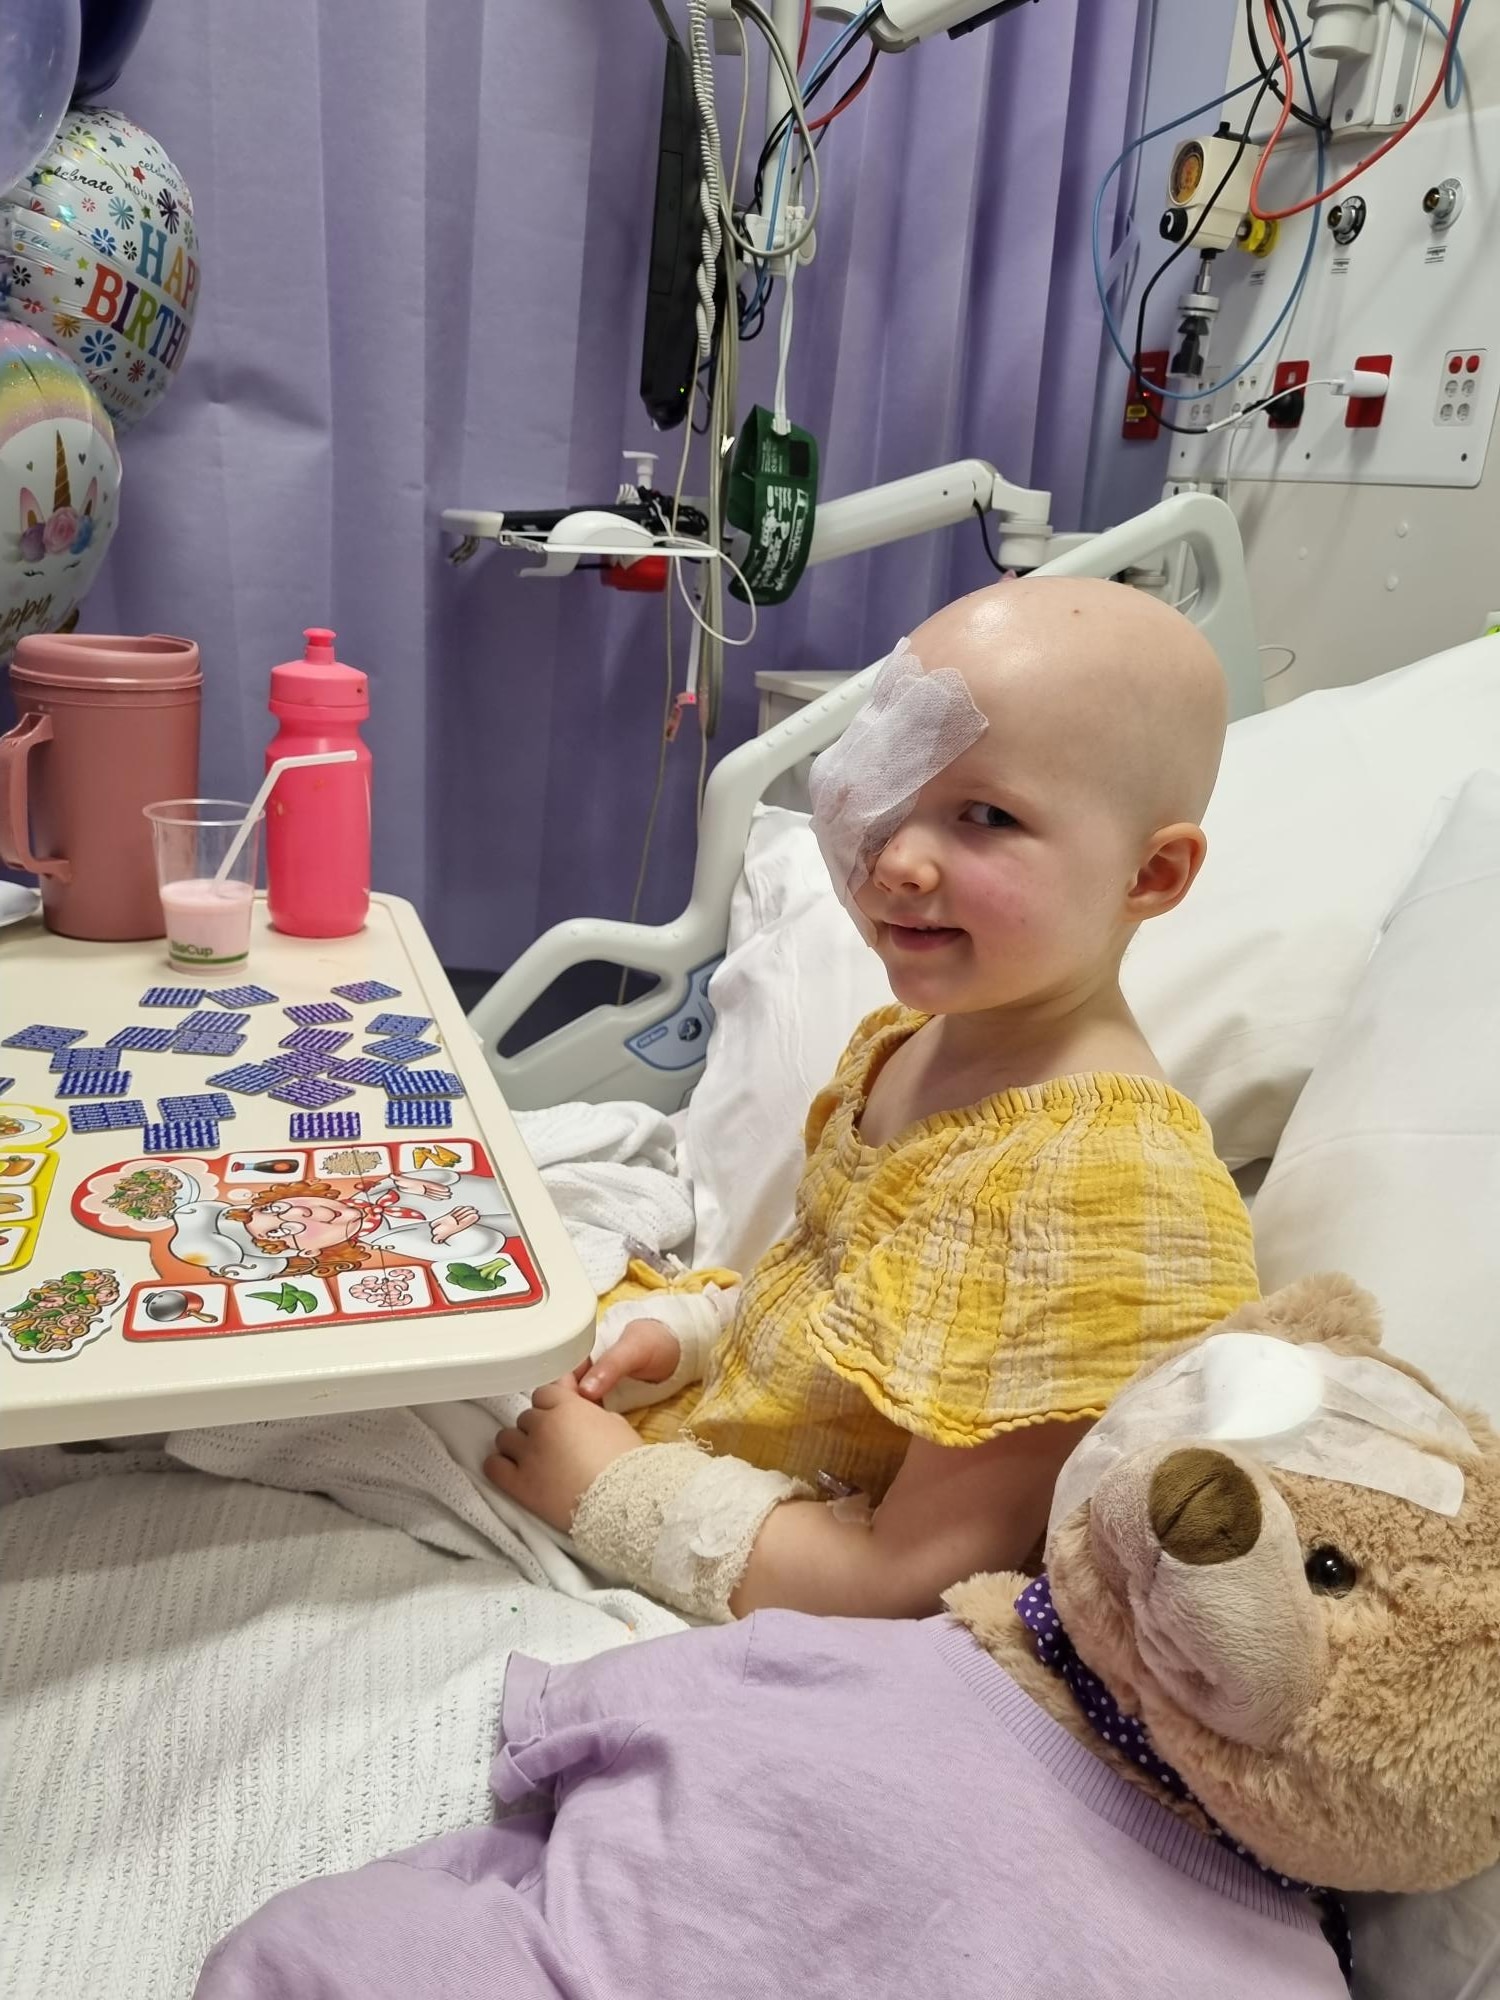 Alice sitting in a hospital bed, eye patch on, teddy bear in front, games on a table in front of her.